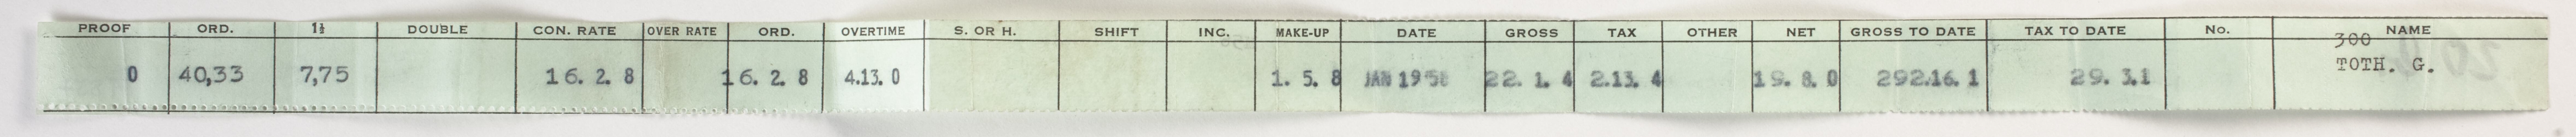 Pay Slip - Issued to Julius Toth, Jan 1958